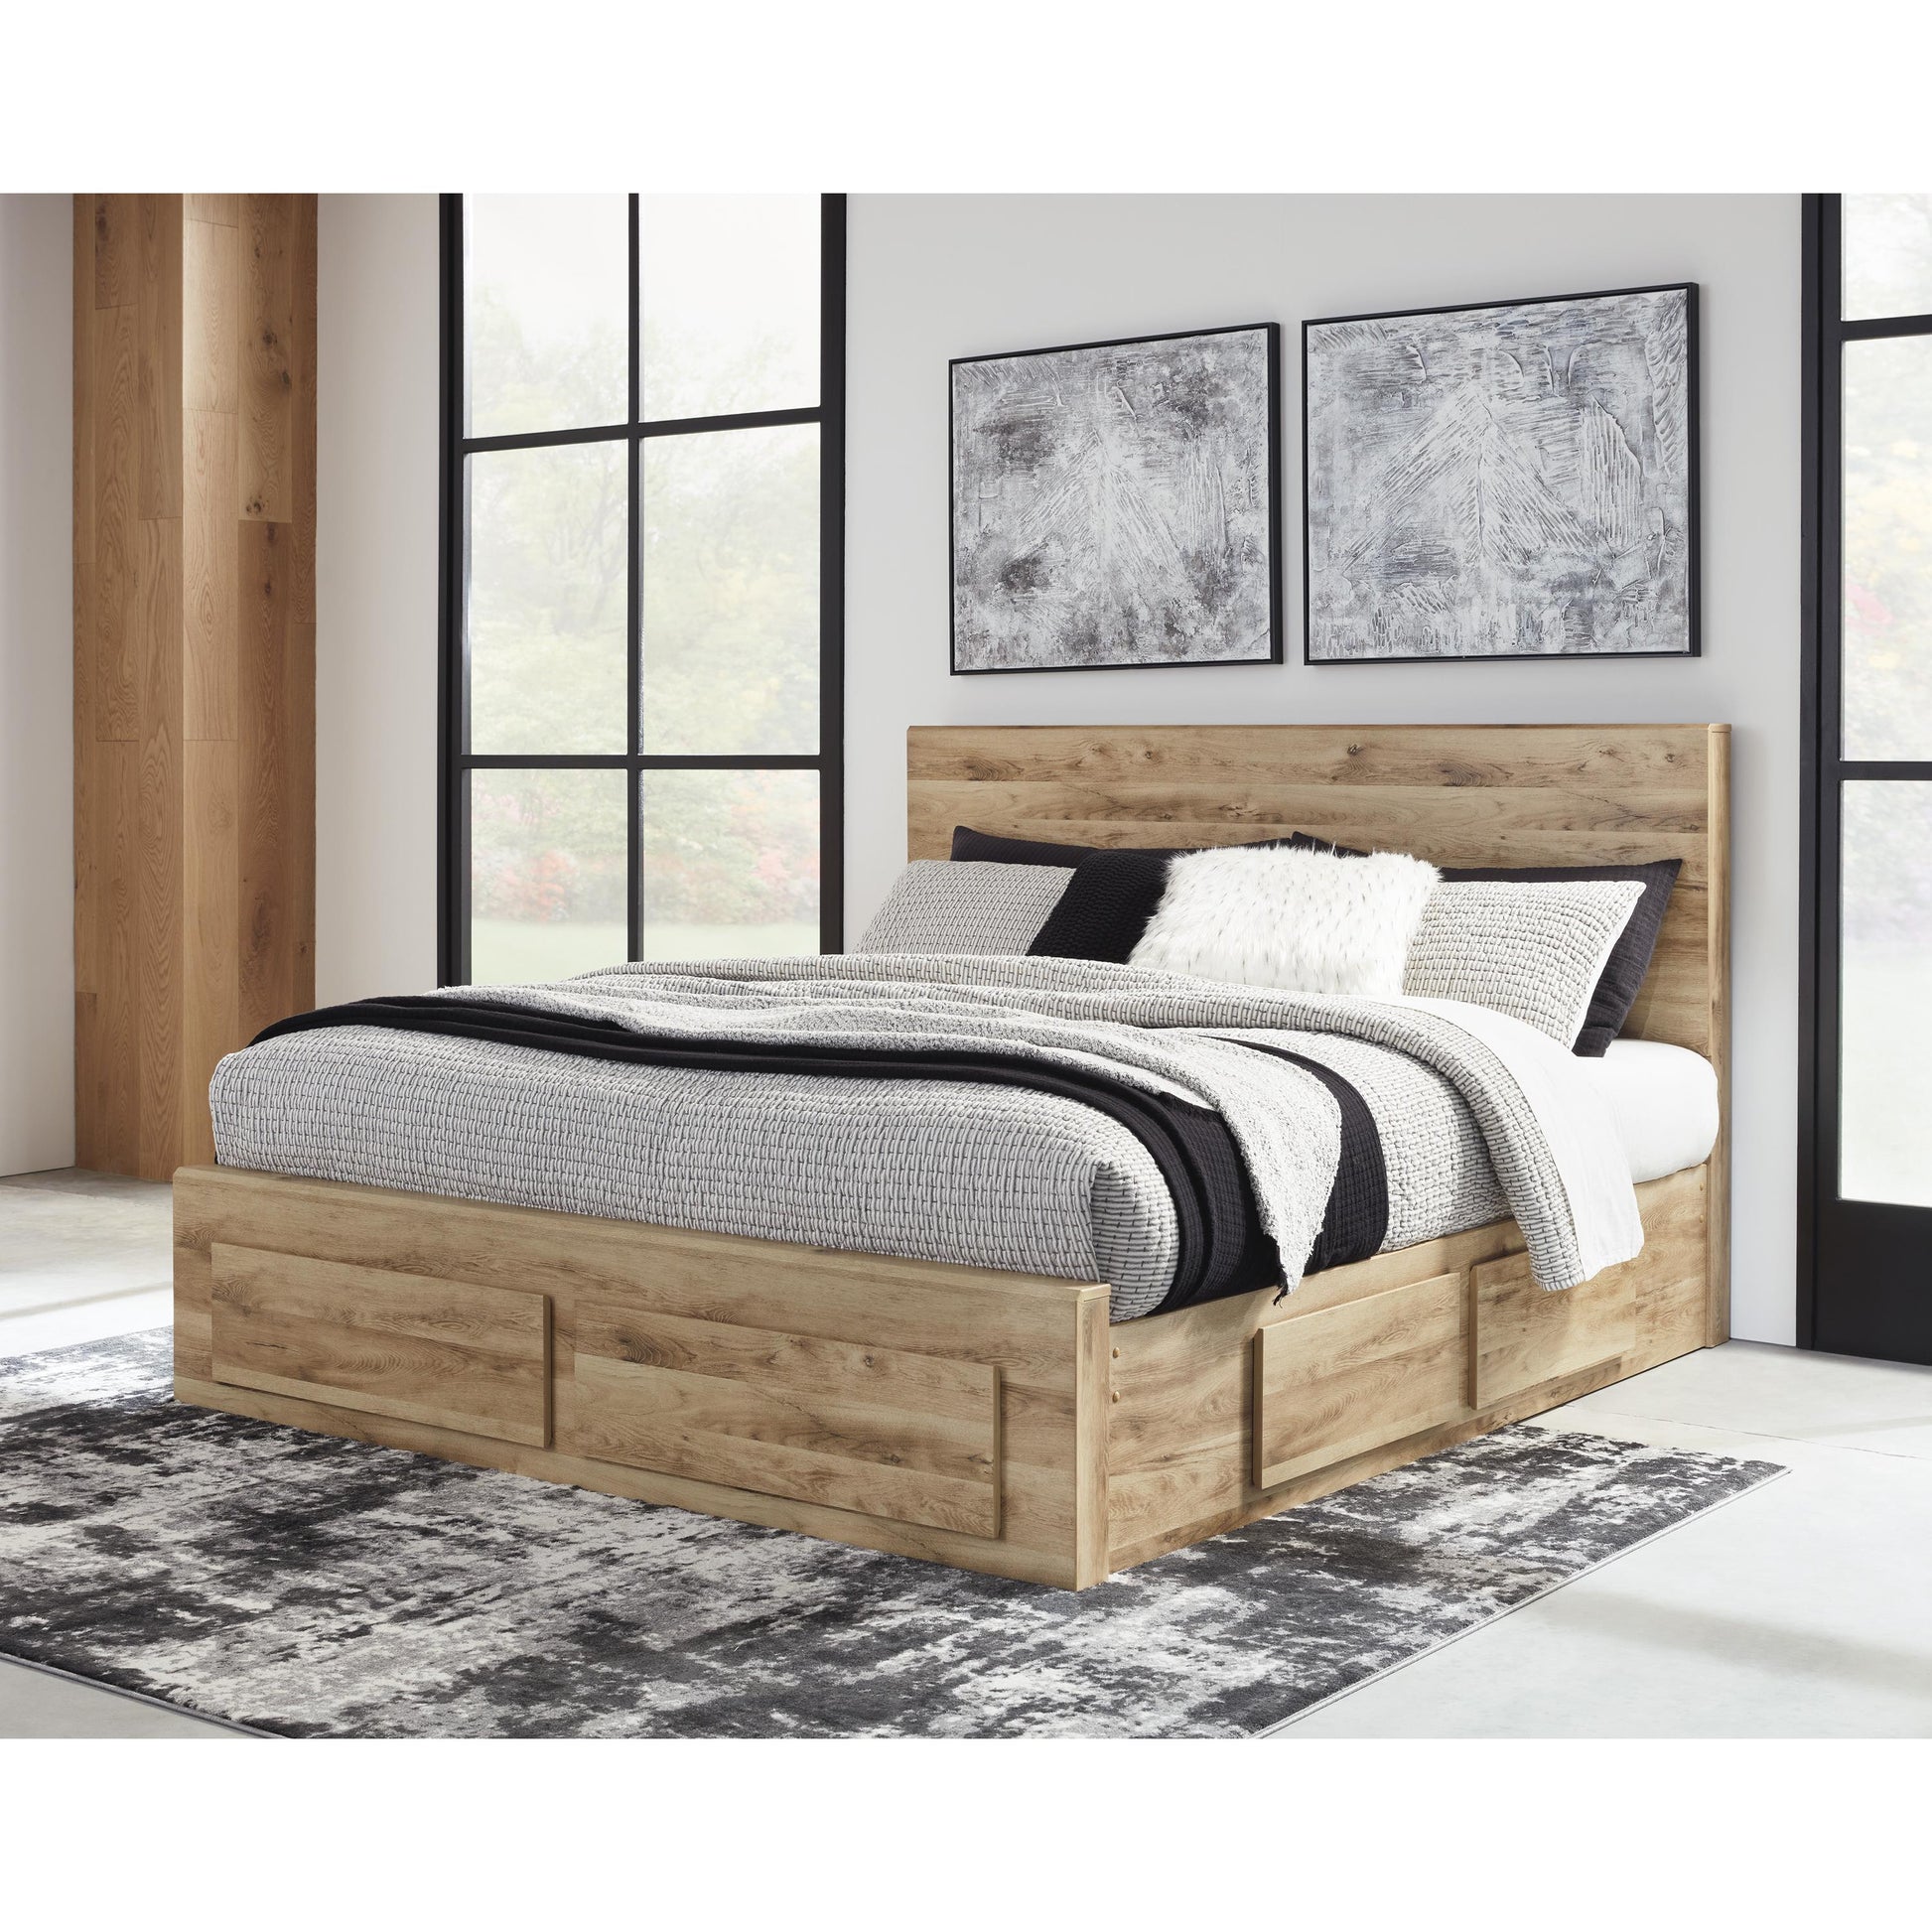 Signature Design by Ashley Hyanna Queen Panel Bed with Storage B1050-57/B1050-54S/B1050-60/B1050-60/B100-13 IMAGE 5